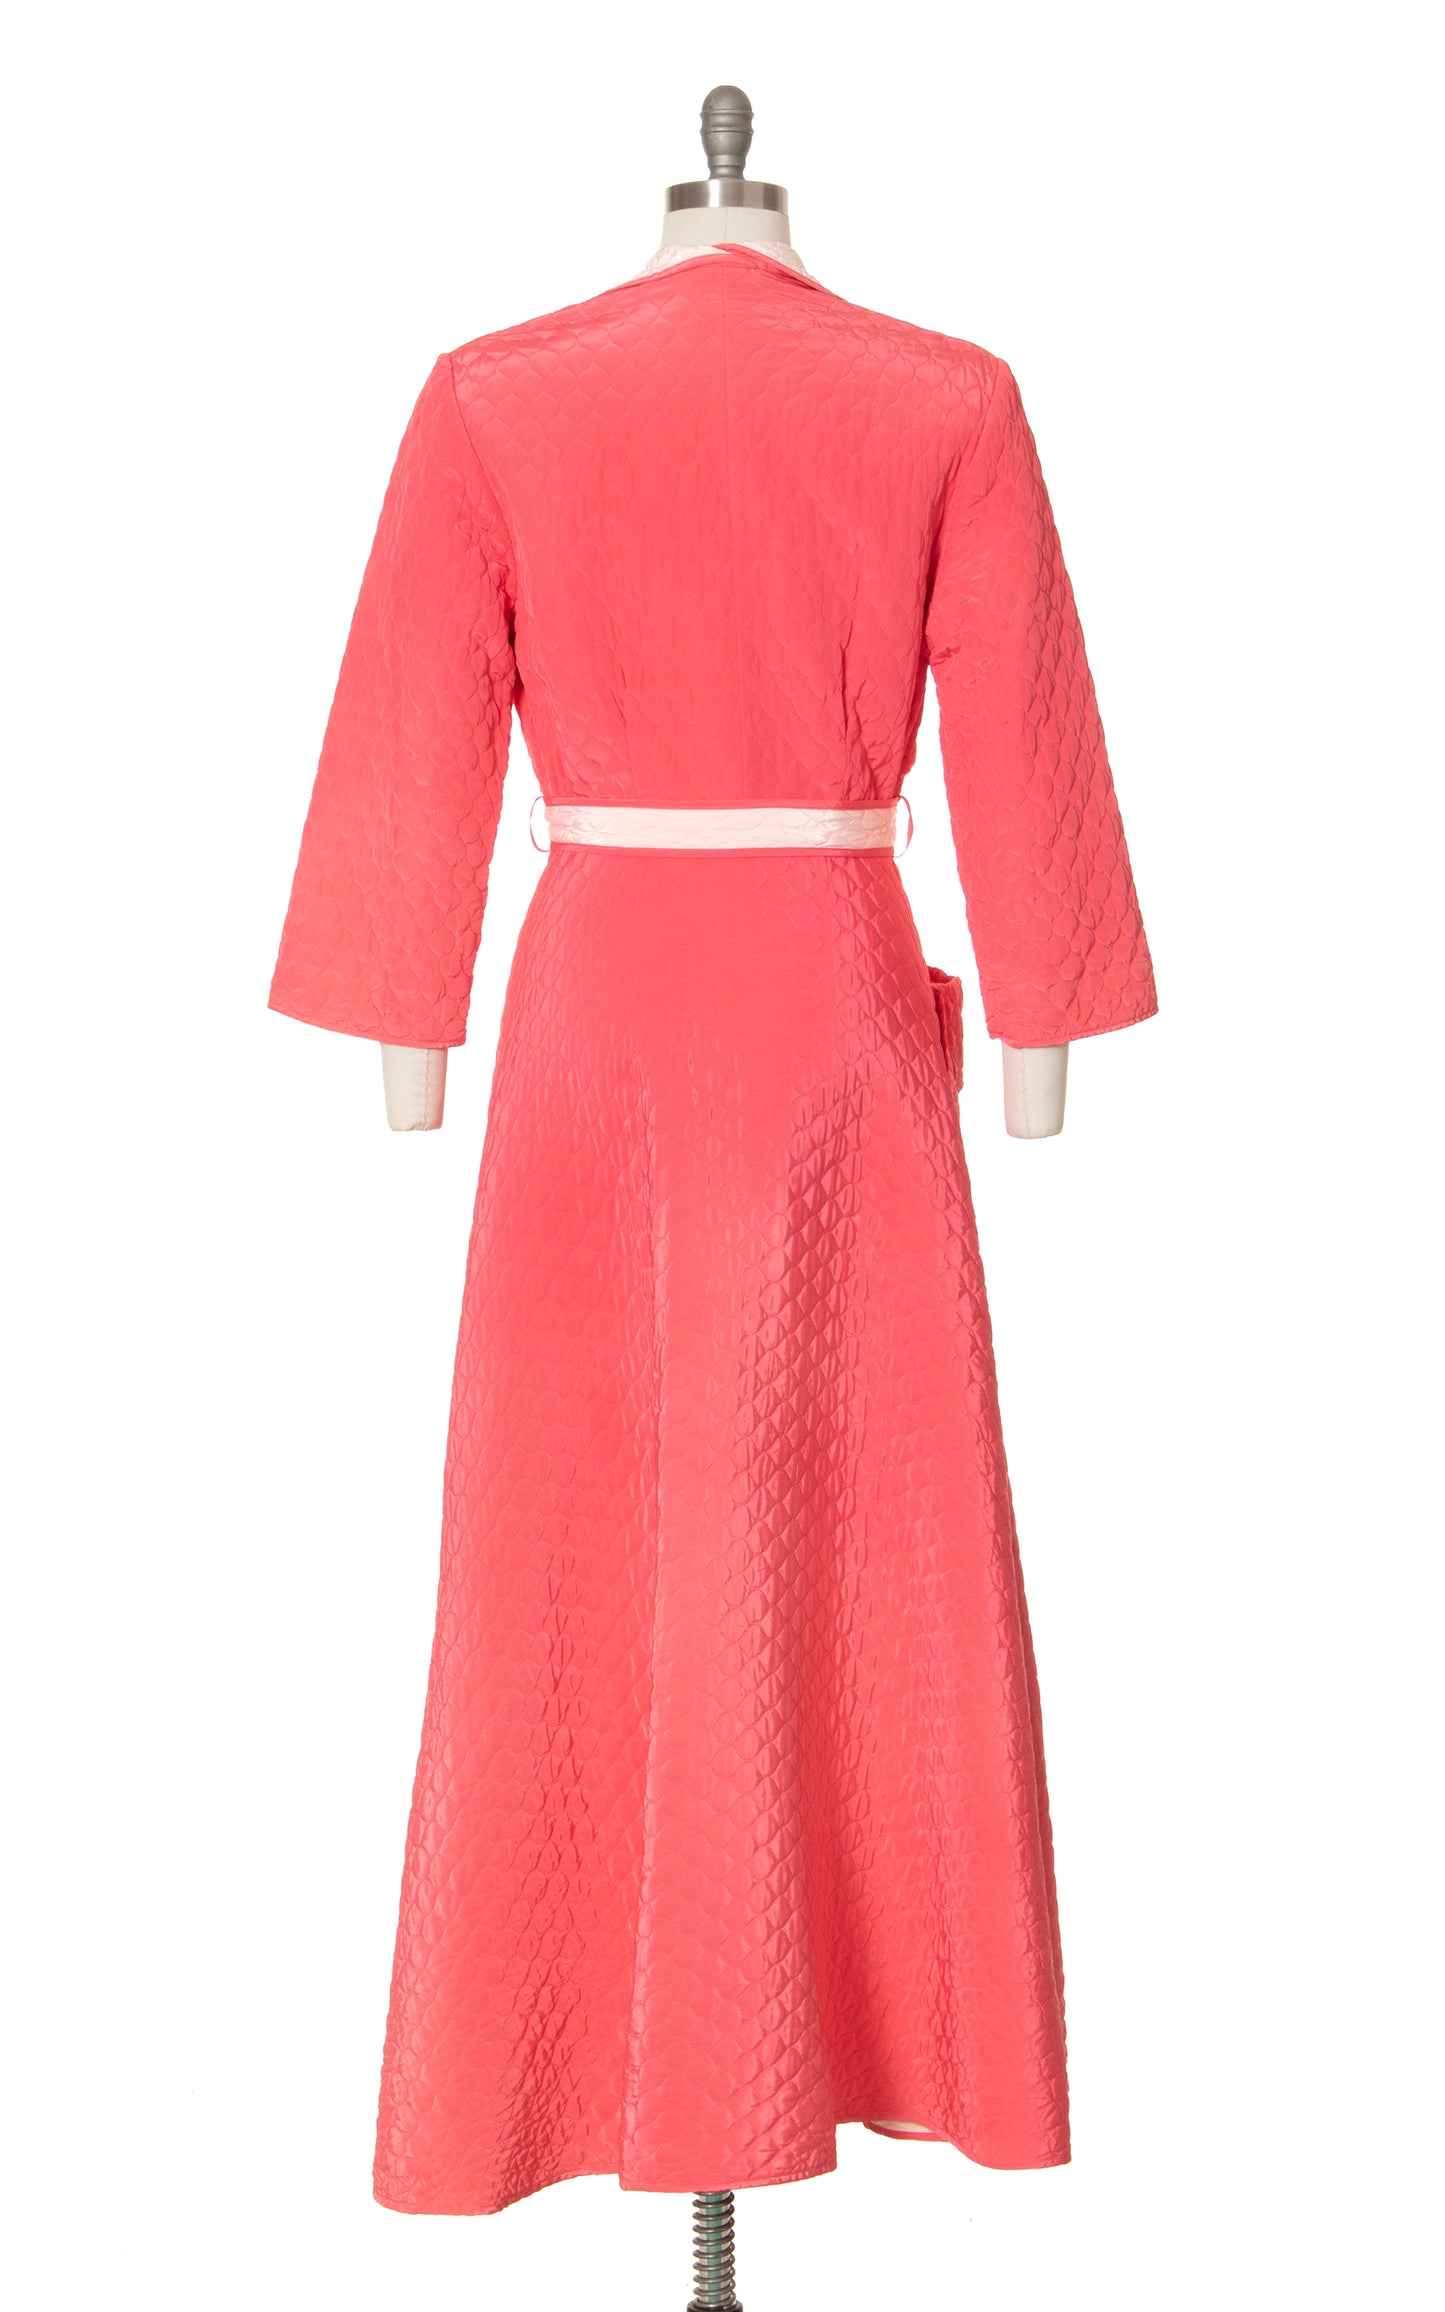 1950s 1960s Salmon Pink Quilted Robe | medium